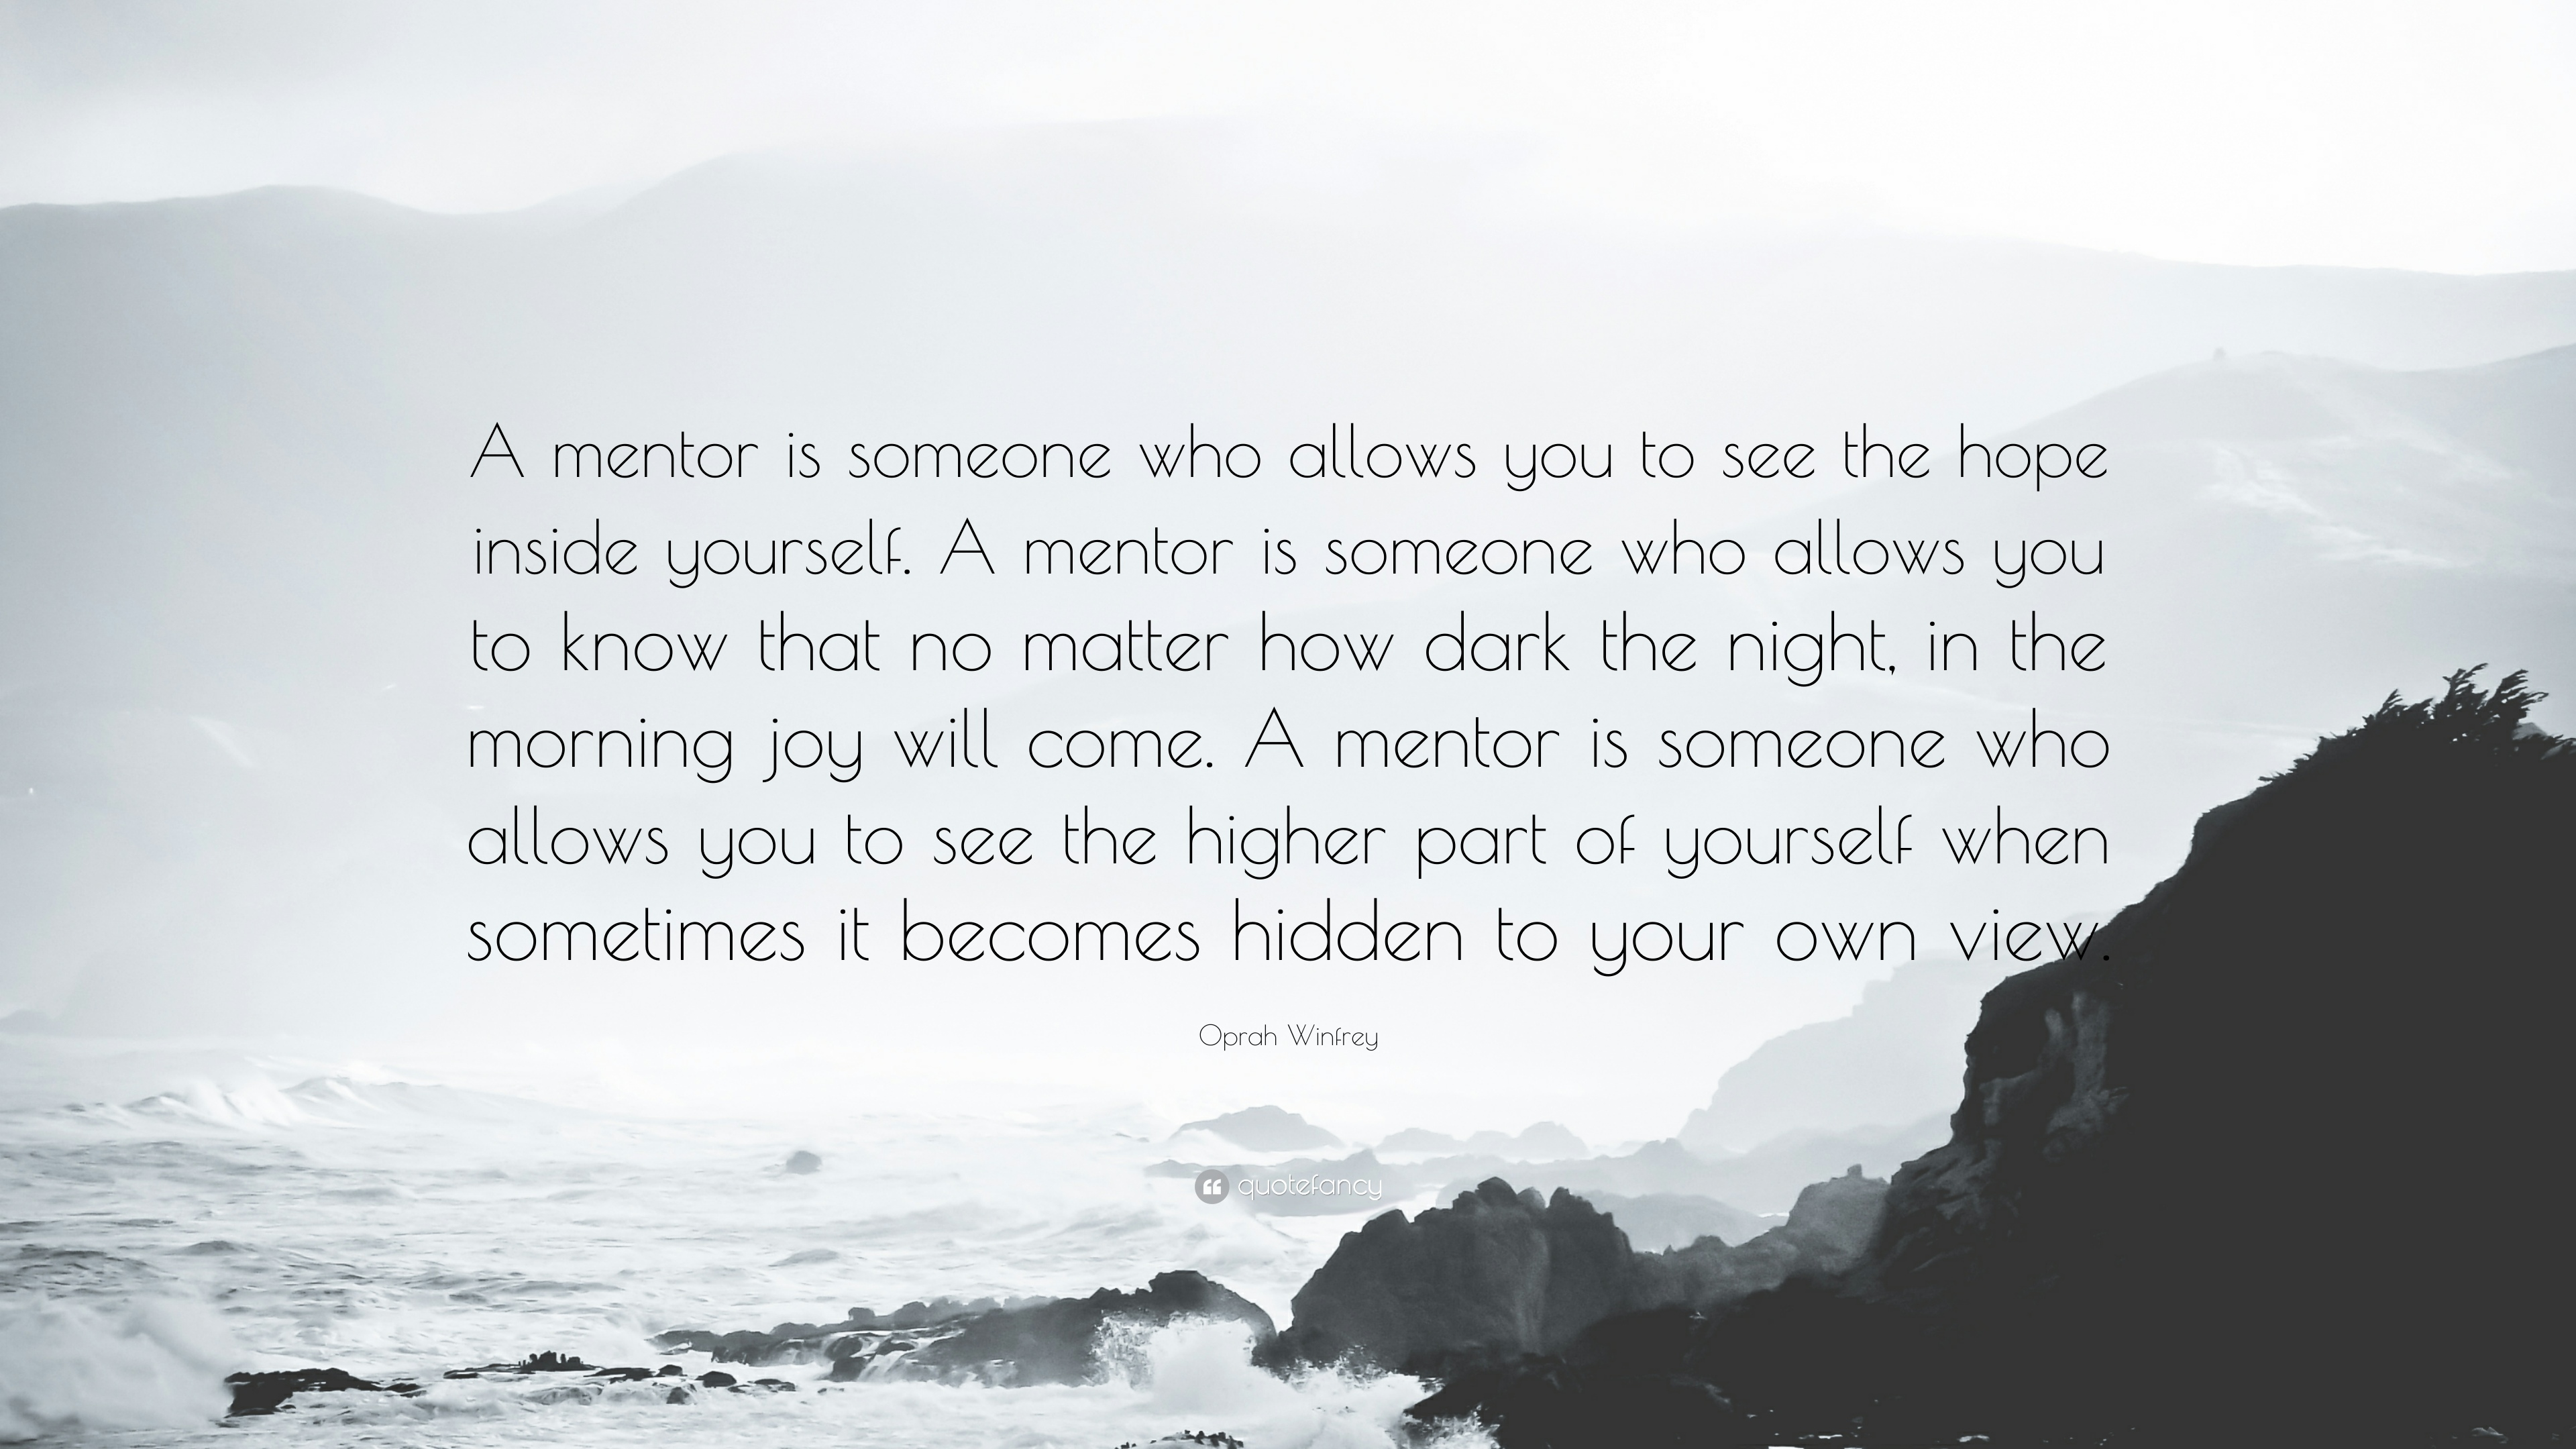 My Mentorship Journey One Year On